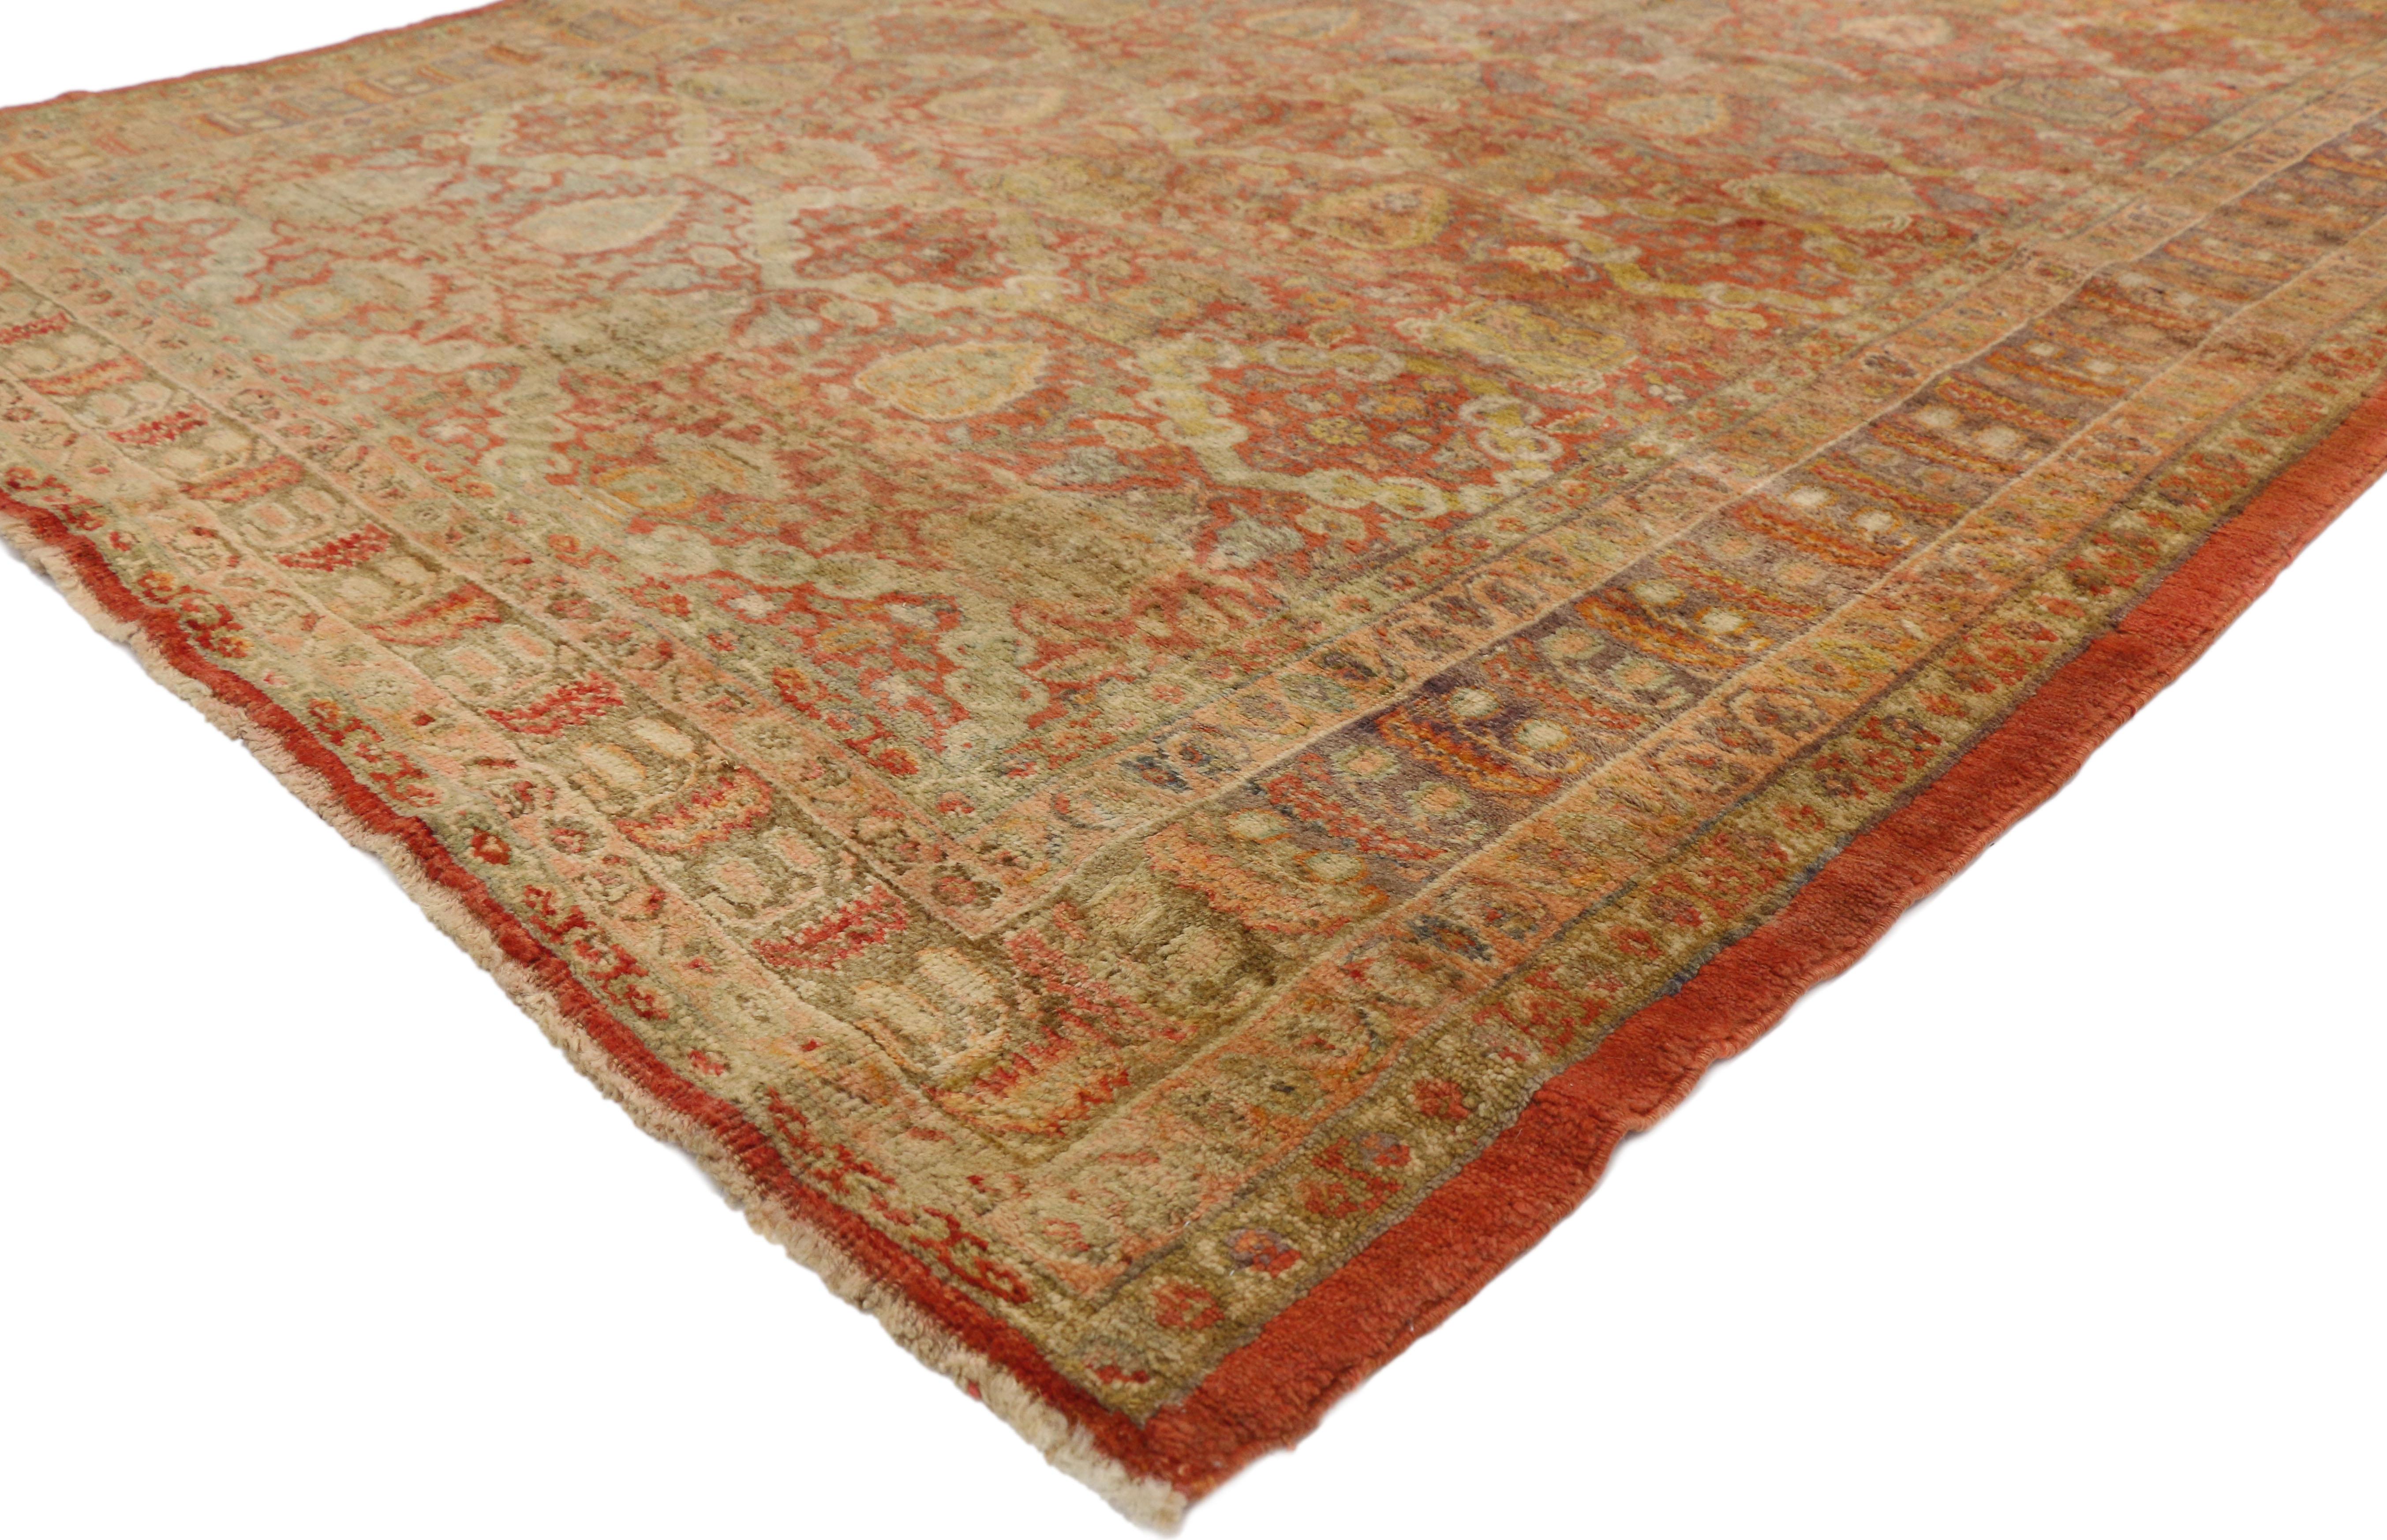 Spanish Colonial Pair of Antique Turkish Oushak Gallery Rugs, Matching Wide Hallway Runners For Sale